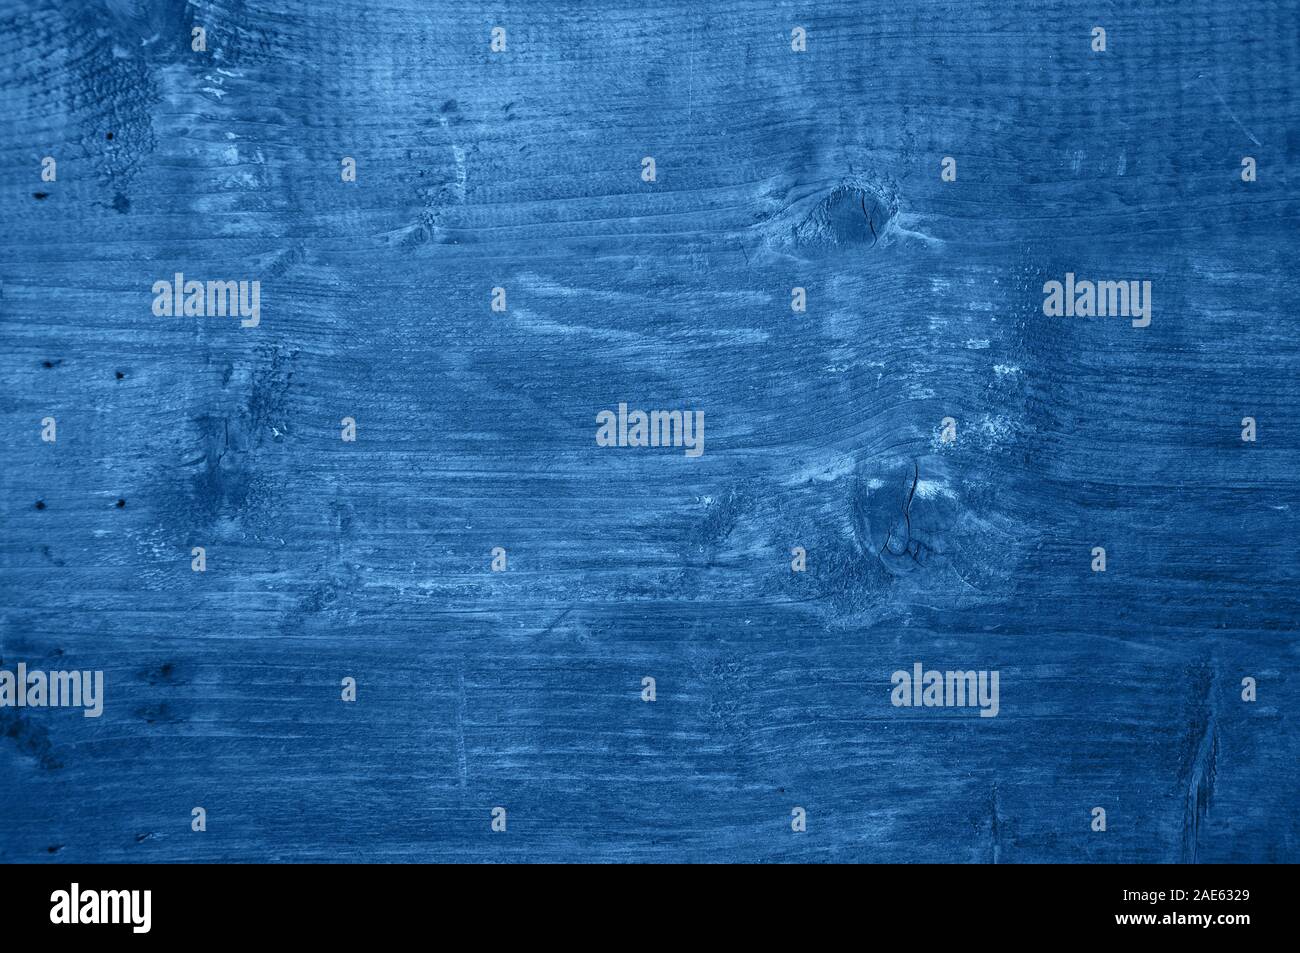 Wooden background in trendy blue color of the year 2020. Stock Photo